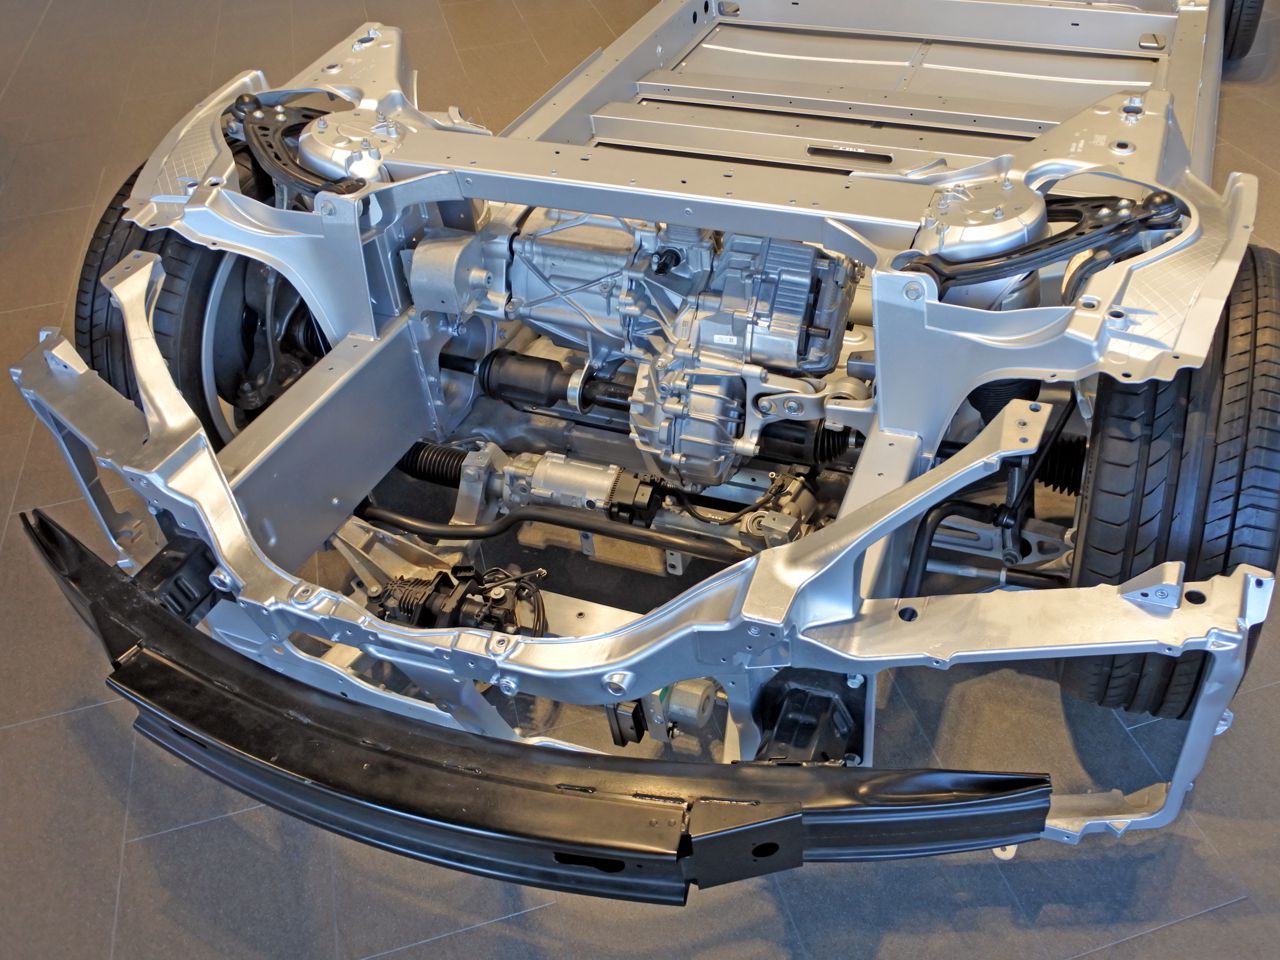 [Translate to Englisch:] Above view of an electric car chassis and battery